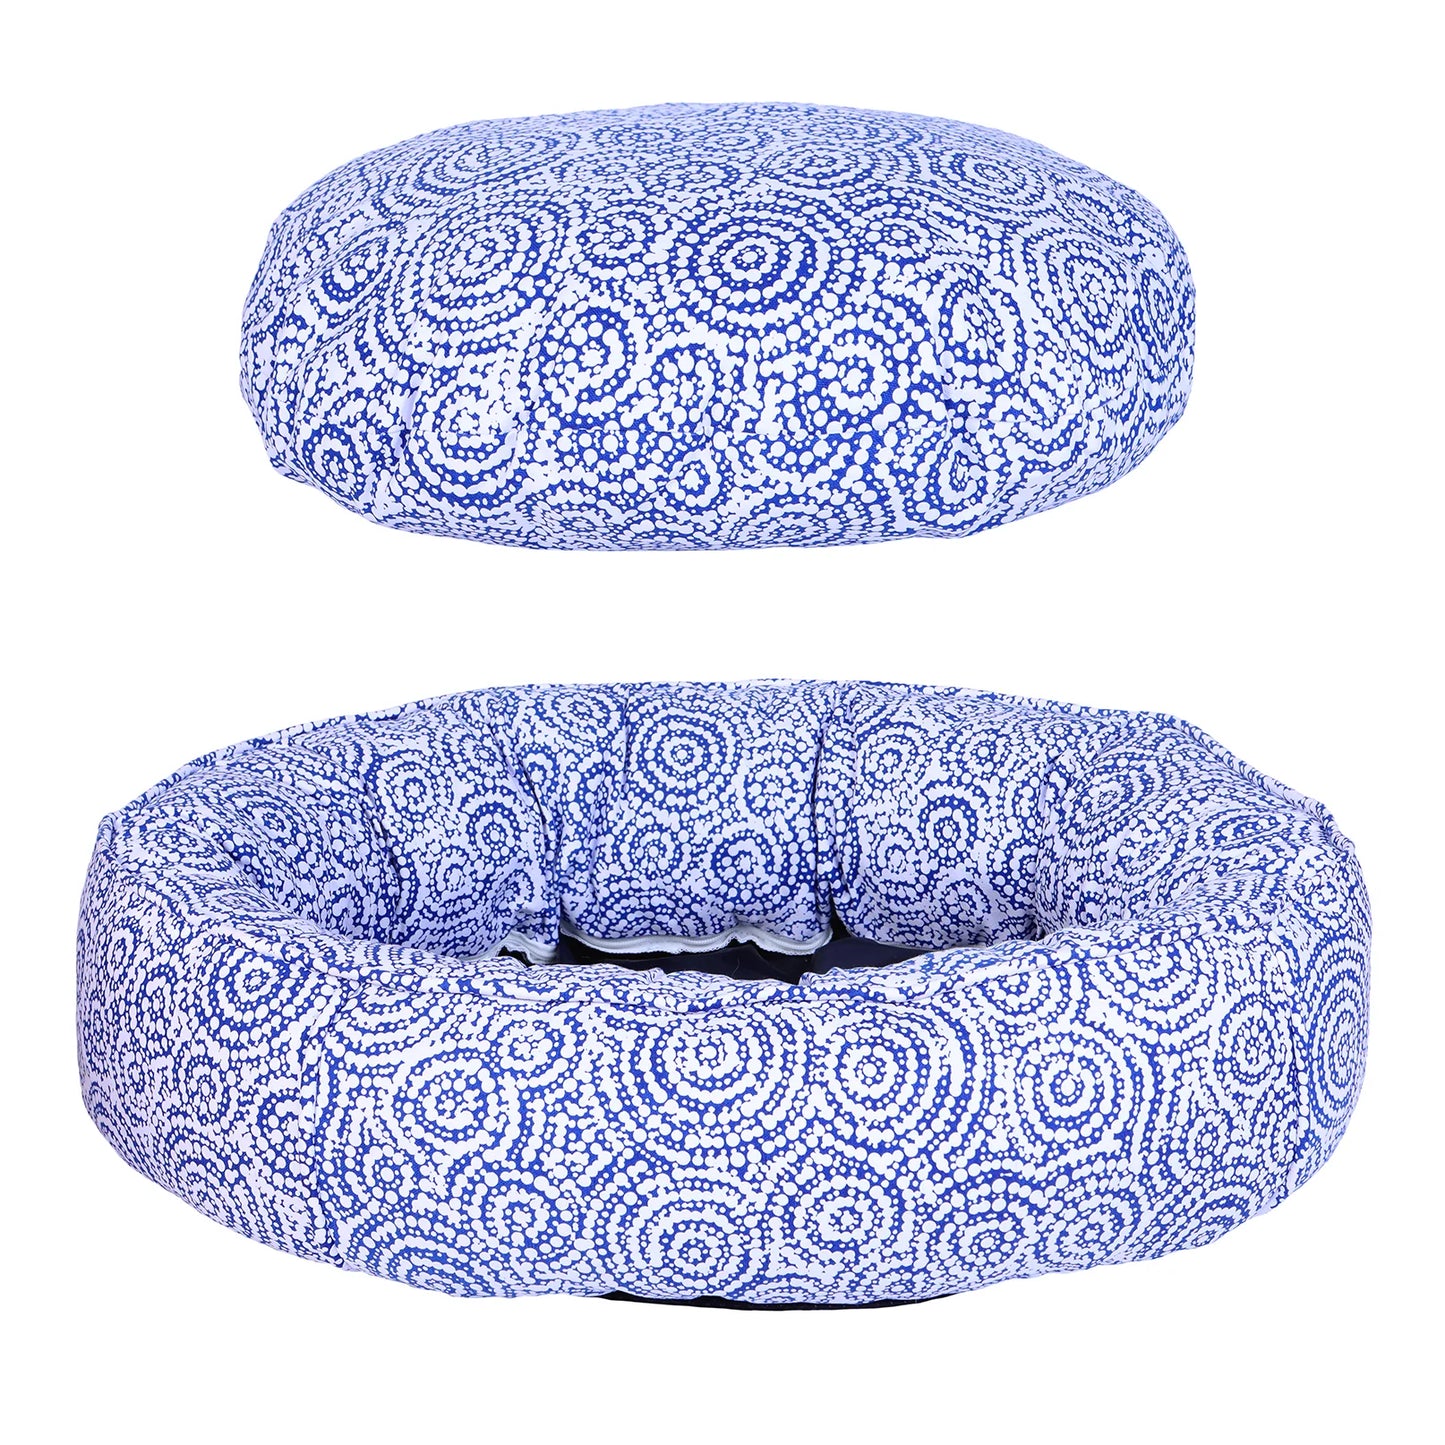 Outback Tails - Round Therapeutic Dog Bed - Ngama